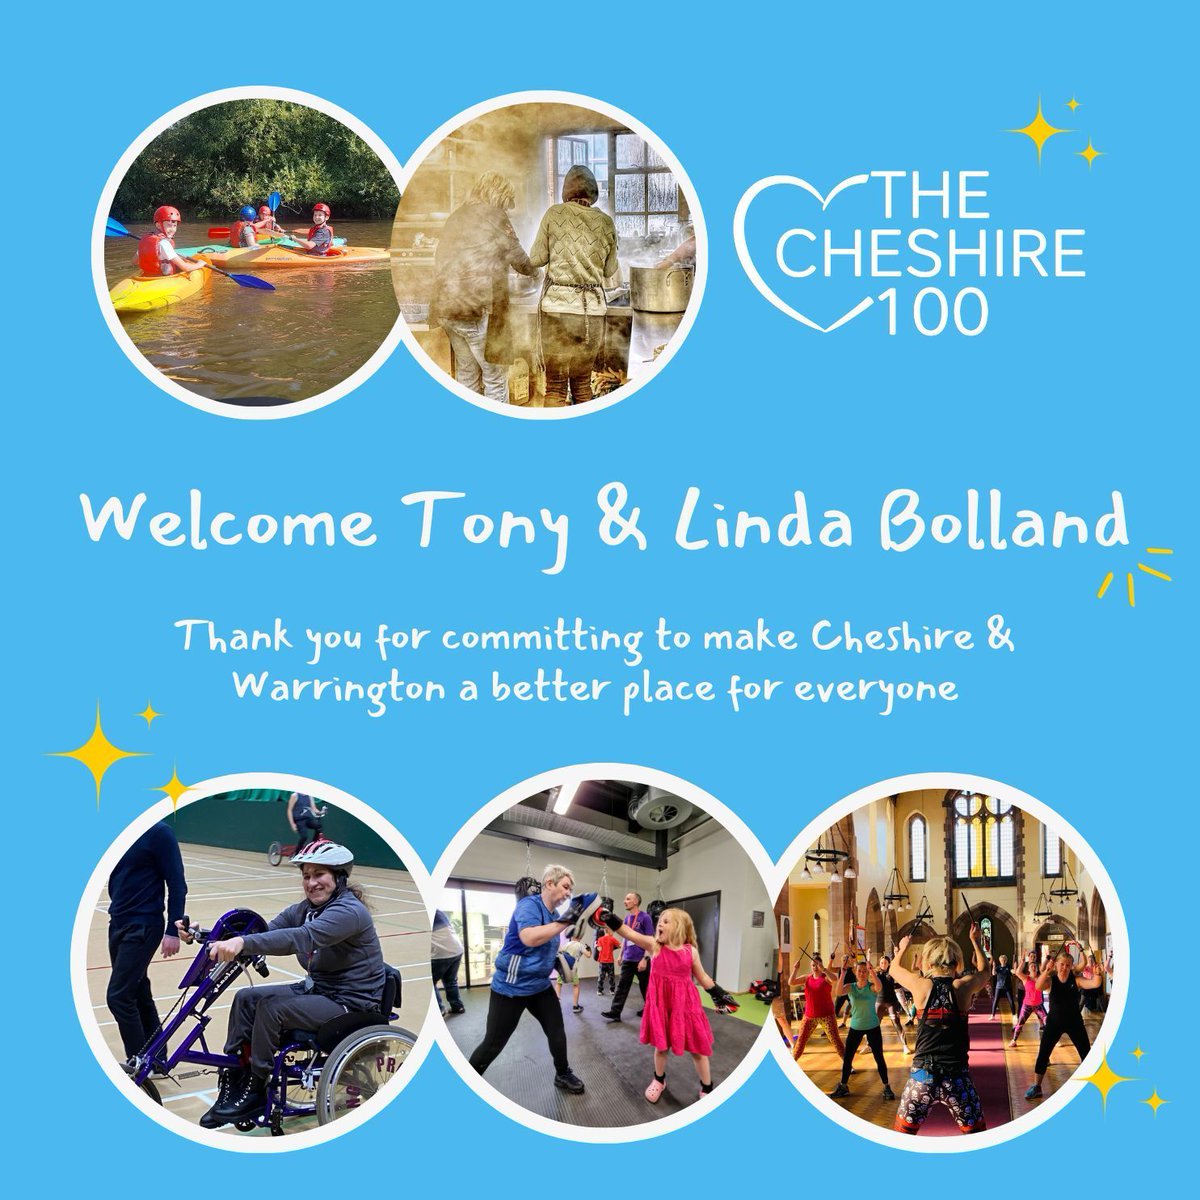 Welcome to the Cheshire 100 Supporters Club Tony & Linda Bolland ⭐ Our individual donors allow CCF to build a happier, fairer and stronger county for all. Thank you so much for your support! #CCf #Cheshire #Cheshire100 buff.ly/3CREKEq